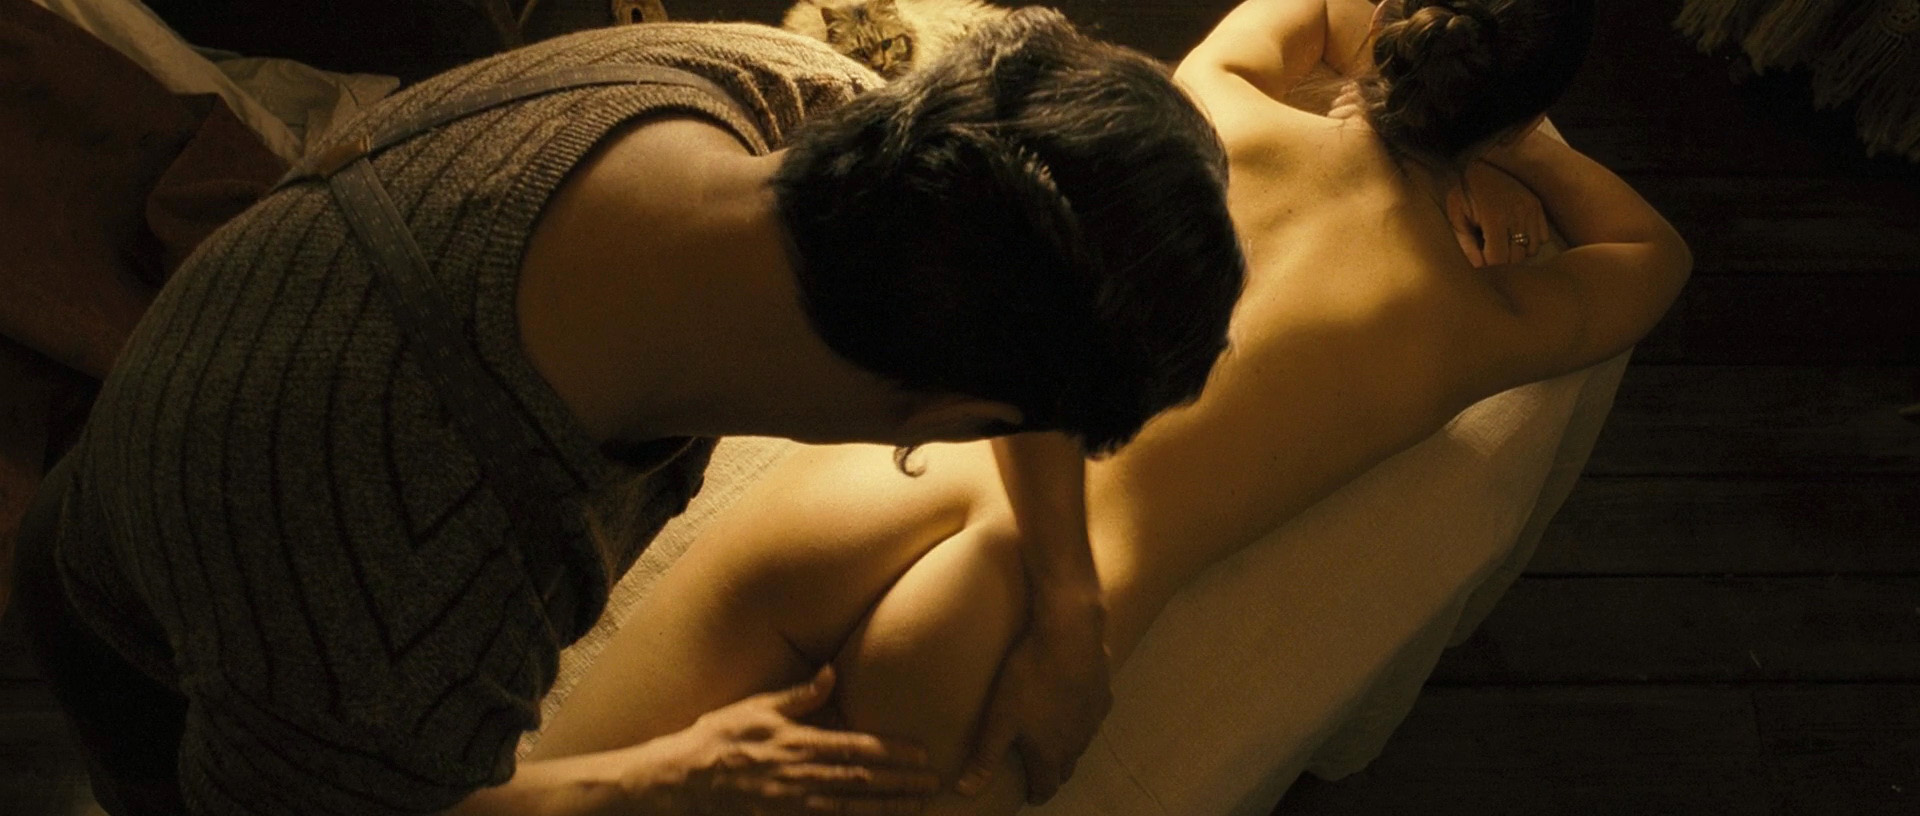 Audrey Tautou Sex Scenes How To Meet Russian